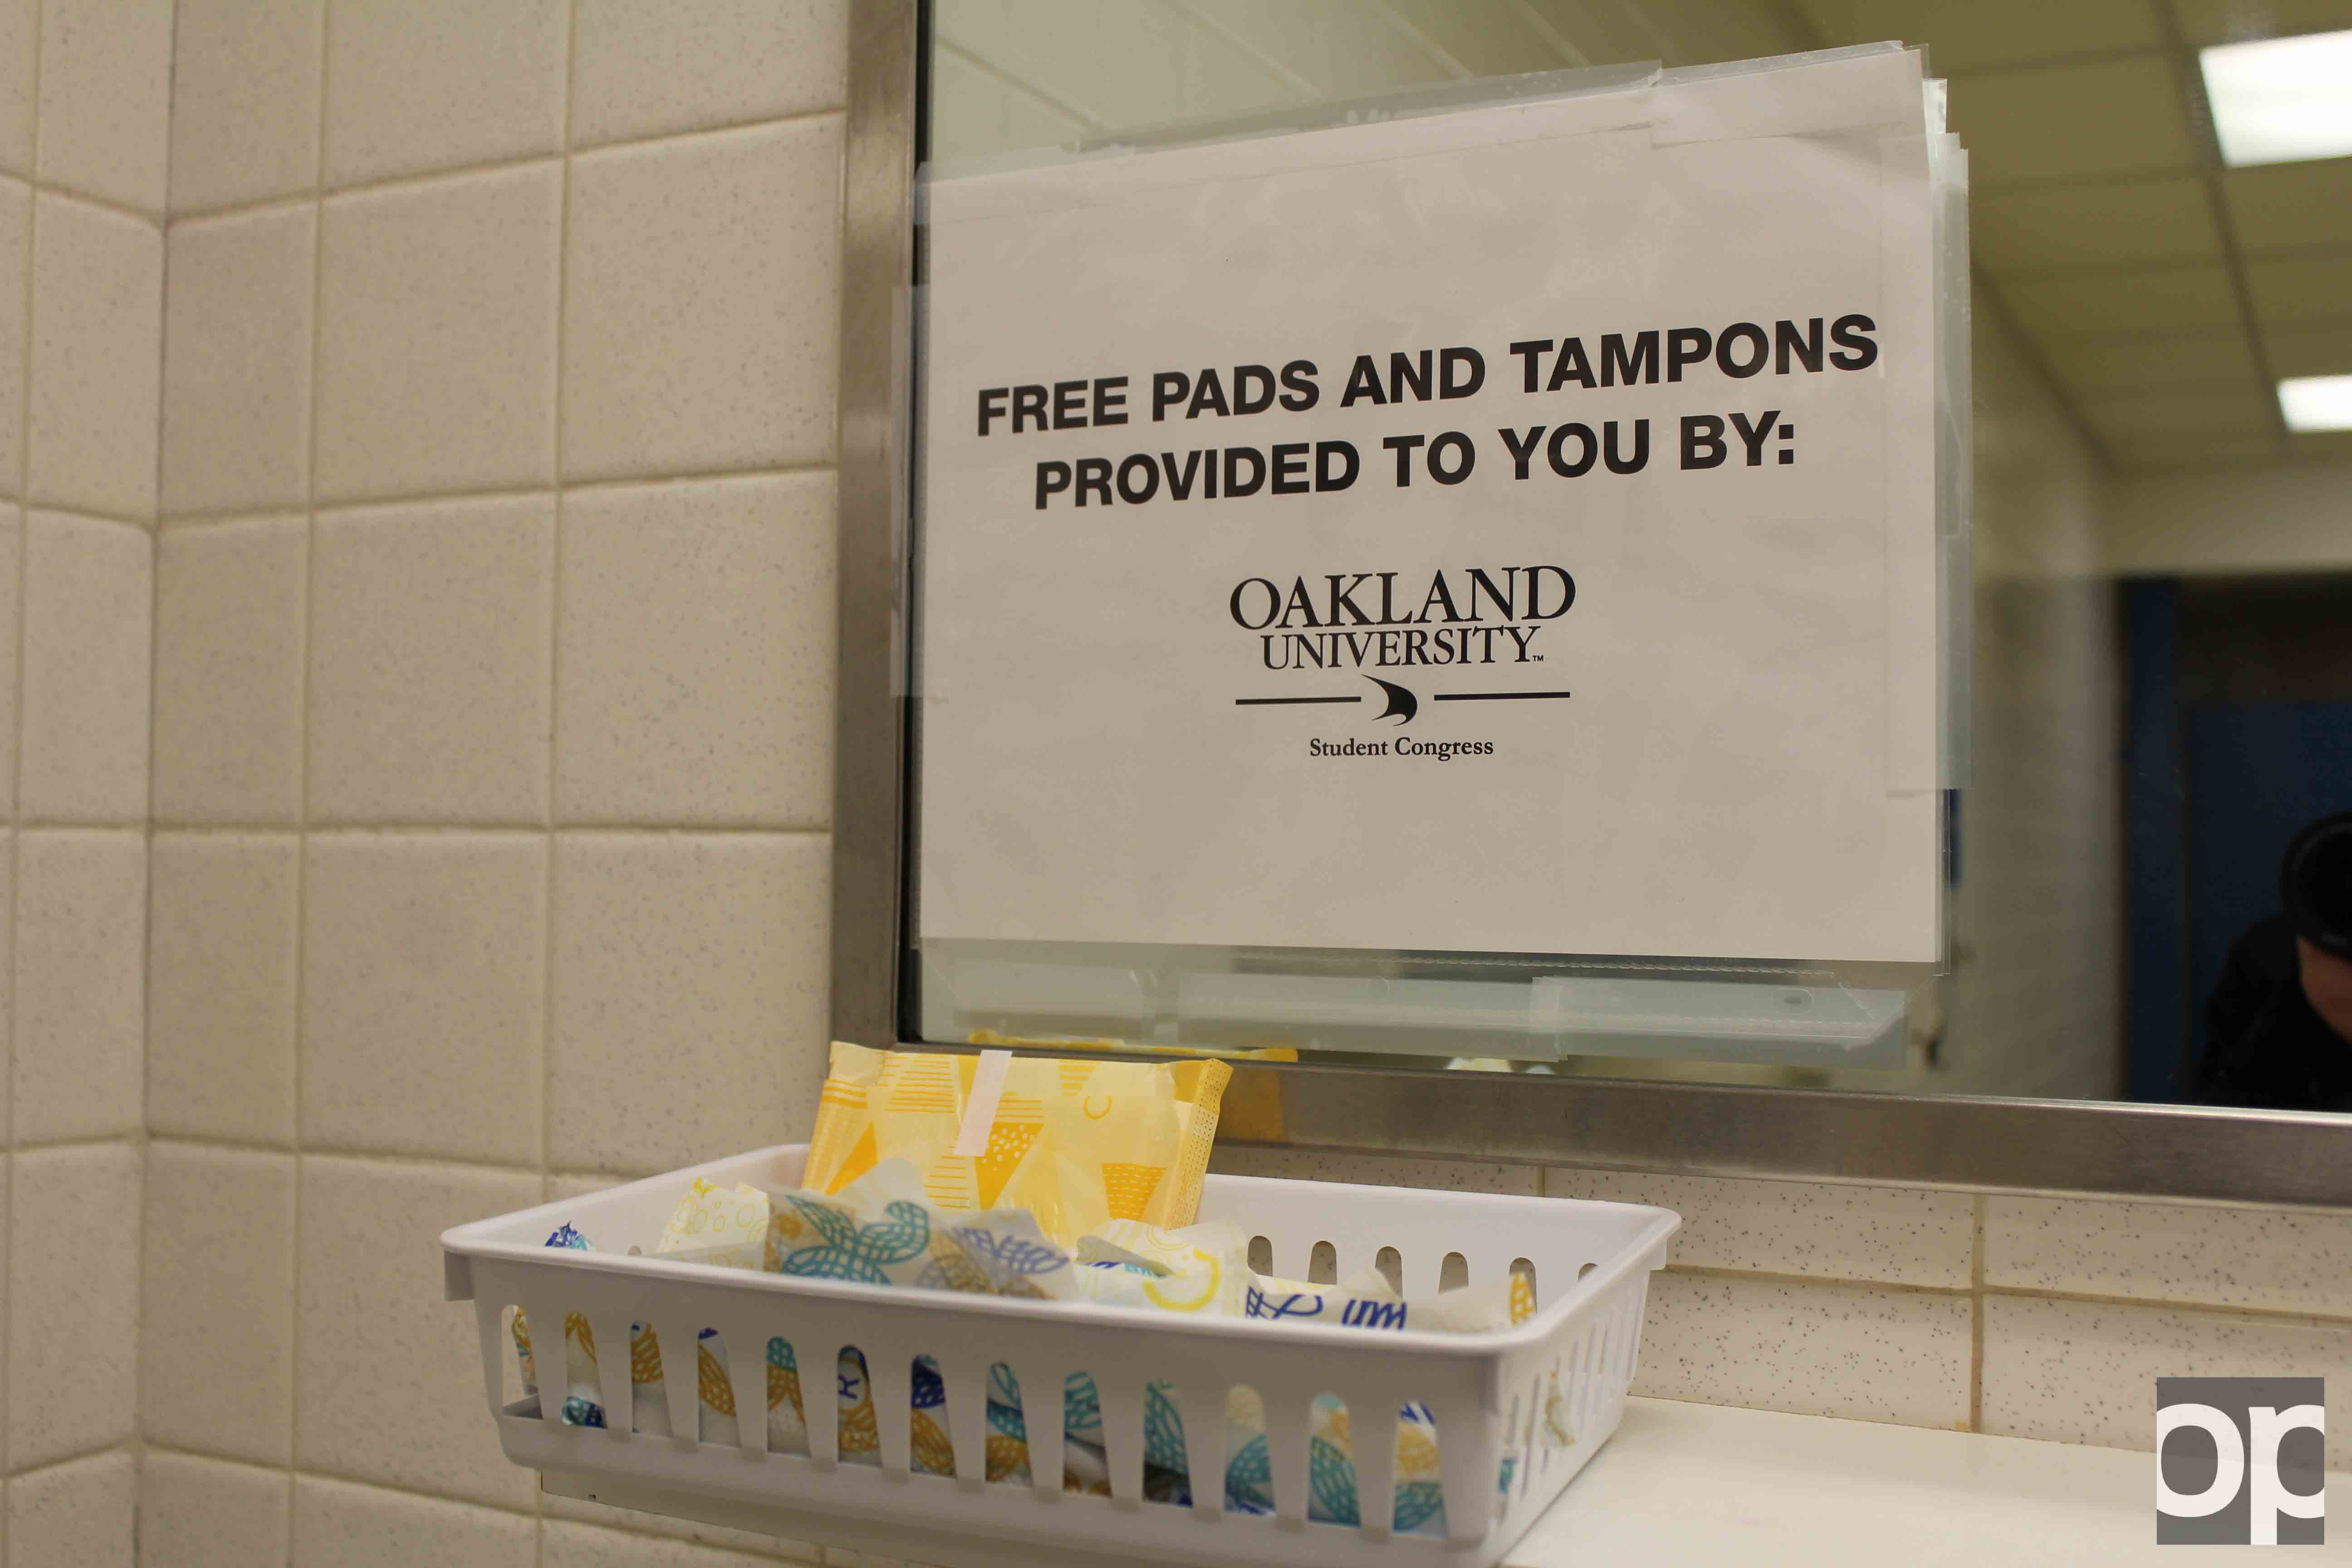 This men's restroom offers free tampons and pads : r/mildlyinteresting